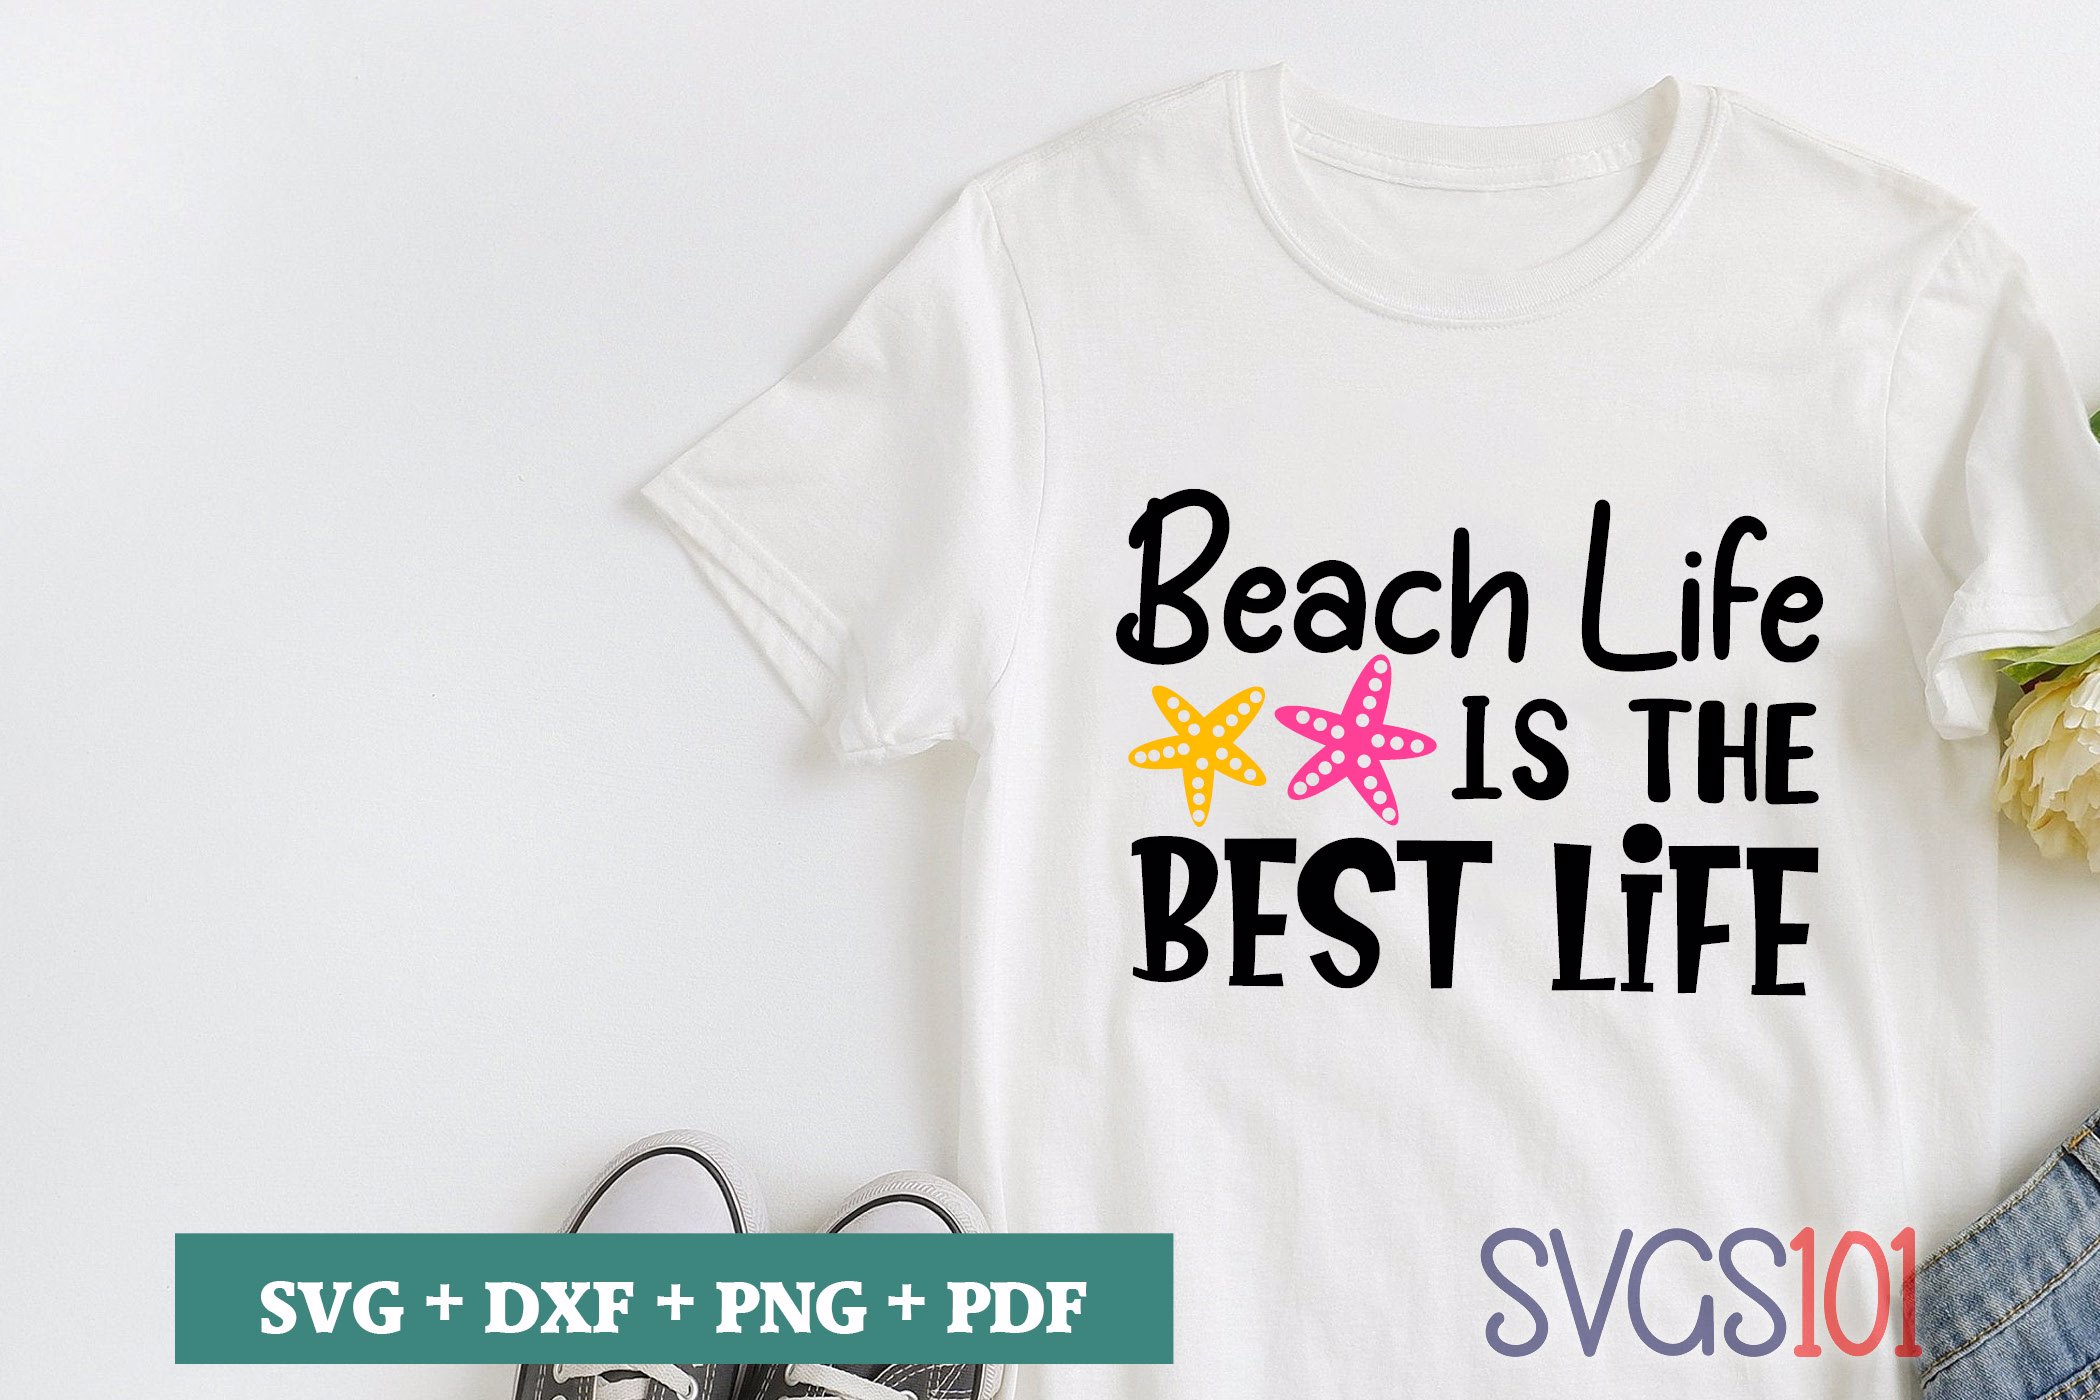 Beach Life Is The Best Life SVG Cuttable file - DXF, EPS, PNG, PDF ...